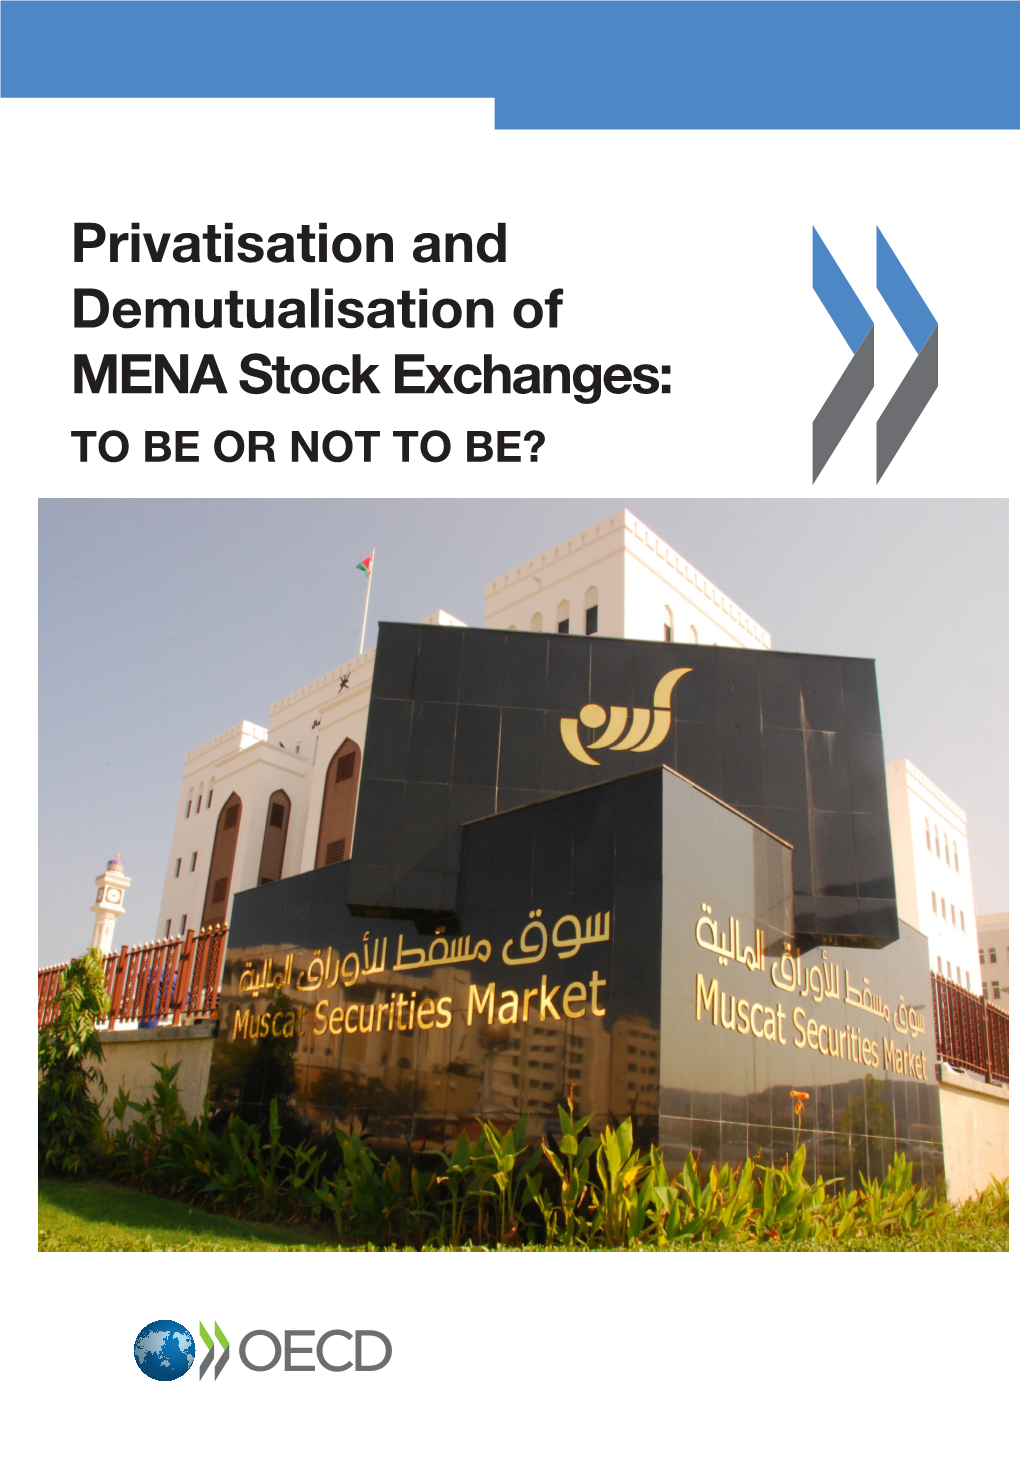 Privatisation and Demutualisation of MENA Stock Exchanges: Privatisation and to BE OR NOT to BE? Demutualisation of MENA Stock Exchanges: Contents